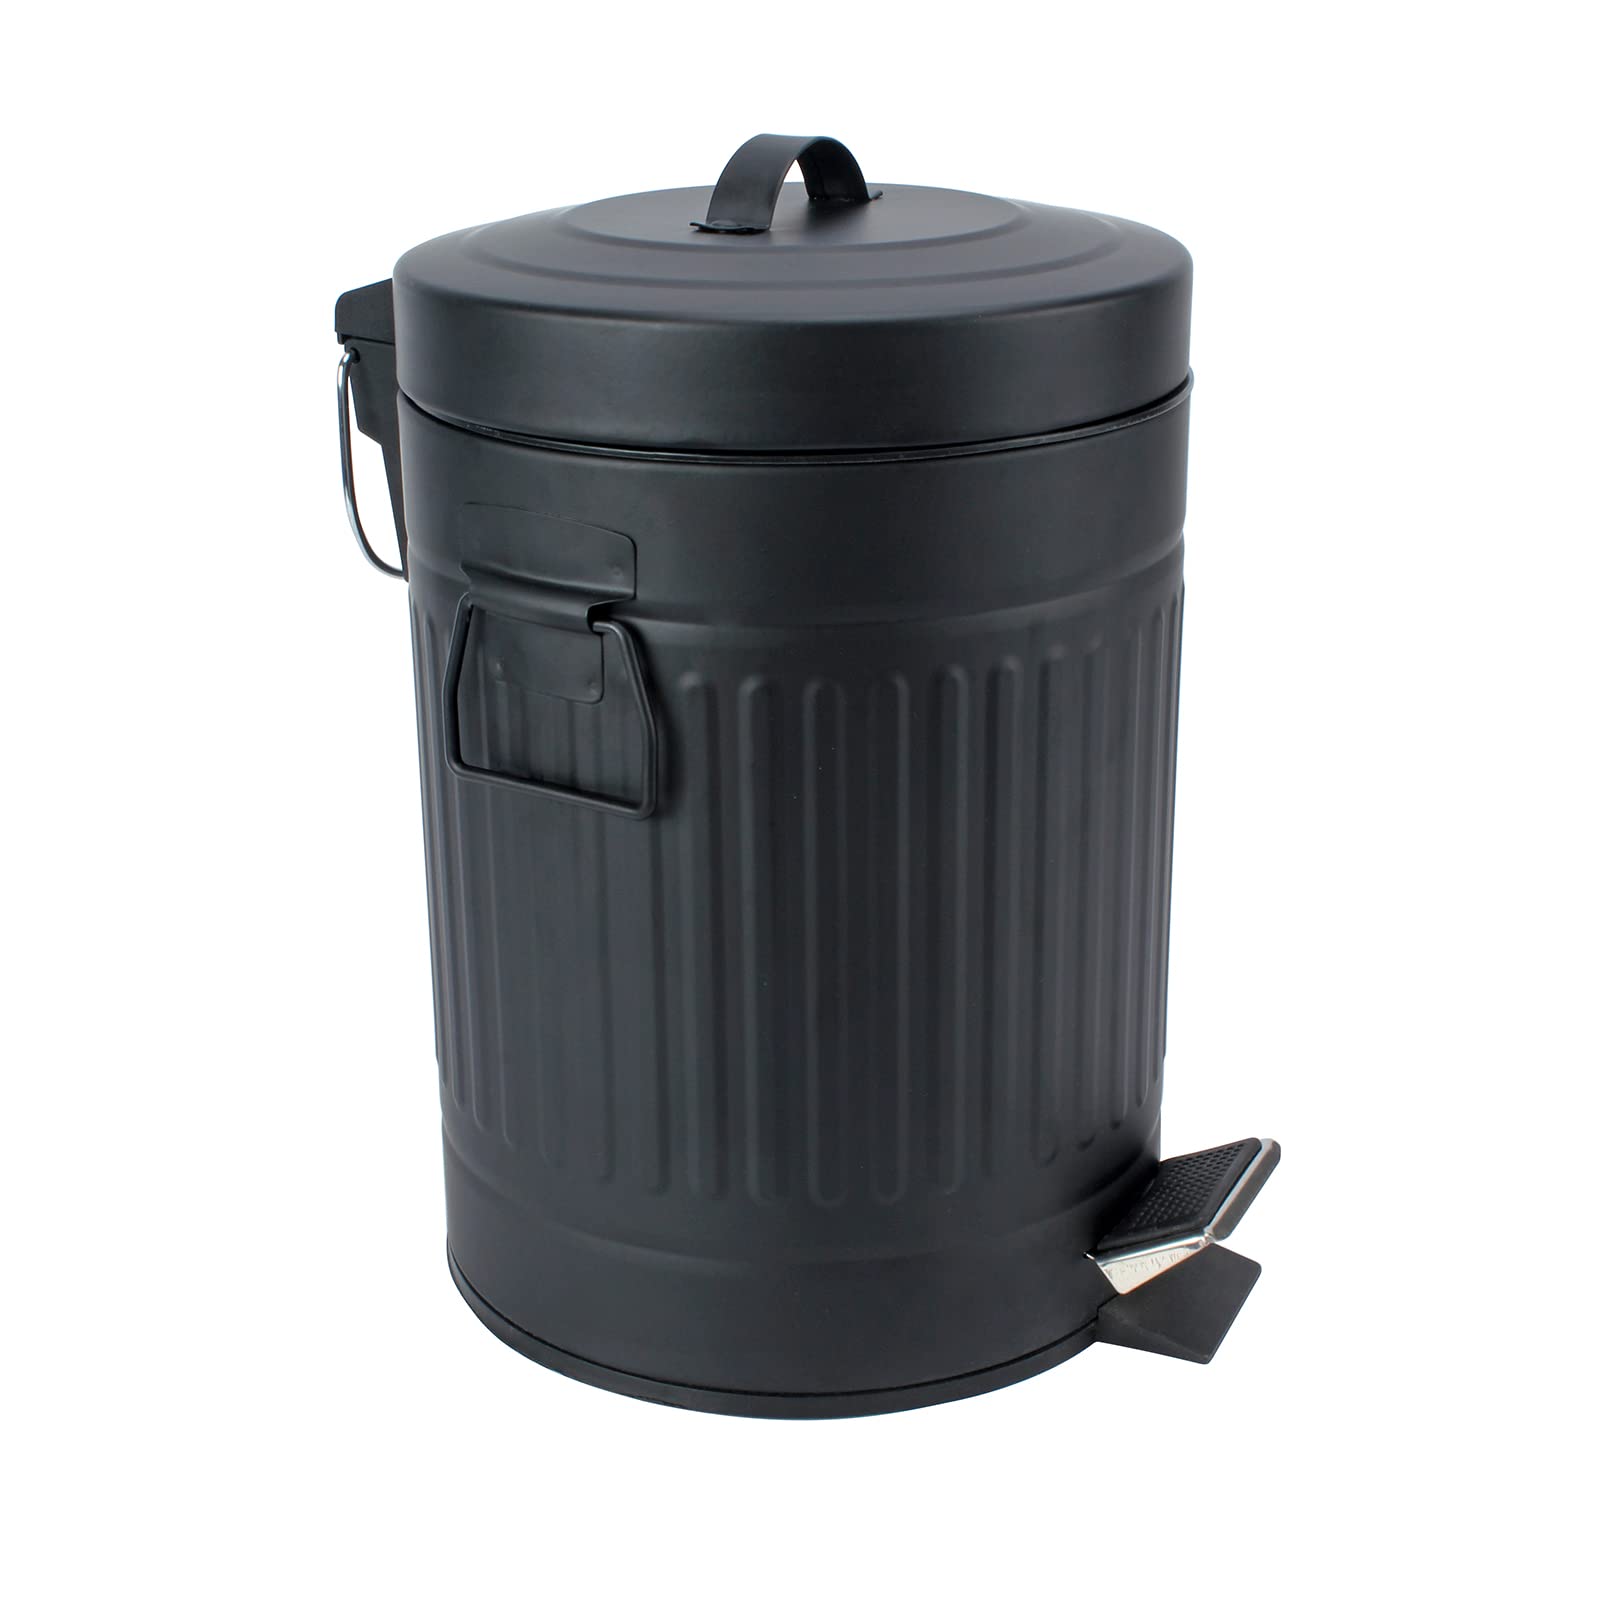 simplemade Round Step Trash Can - 5 Liter / 1.3 Gallon - Black Stainless Steel Bathroom Trash Can | Small Trash Can with Lid | Office Trash Can | Small Garbage Can with Lid | Metal Wastebasket  - Very Good